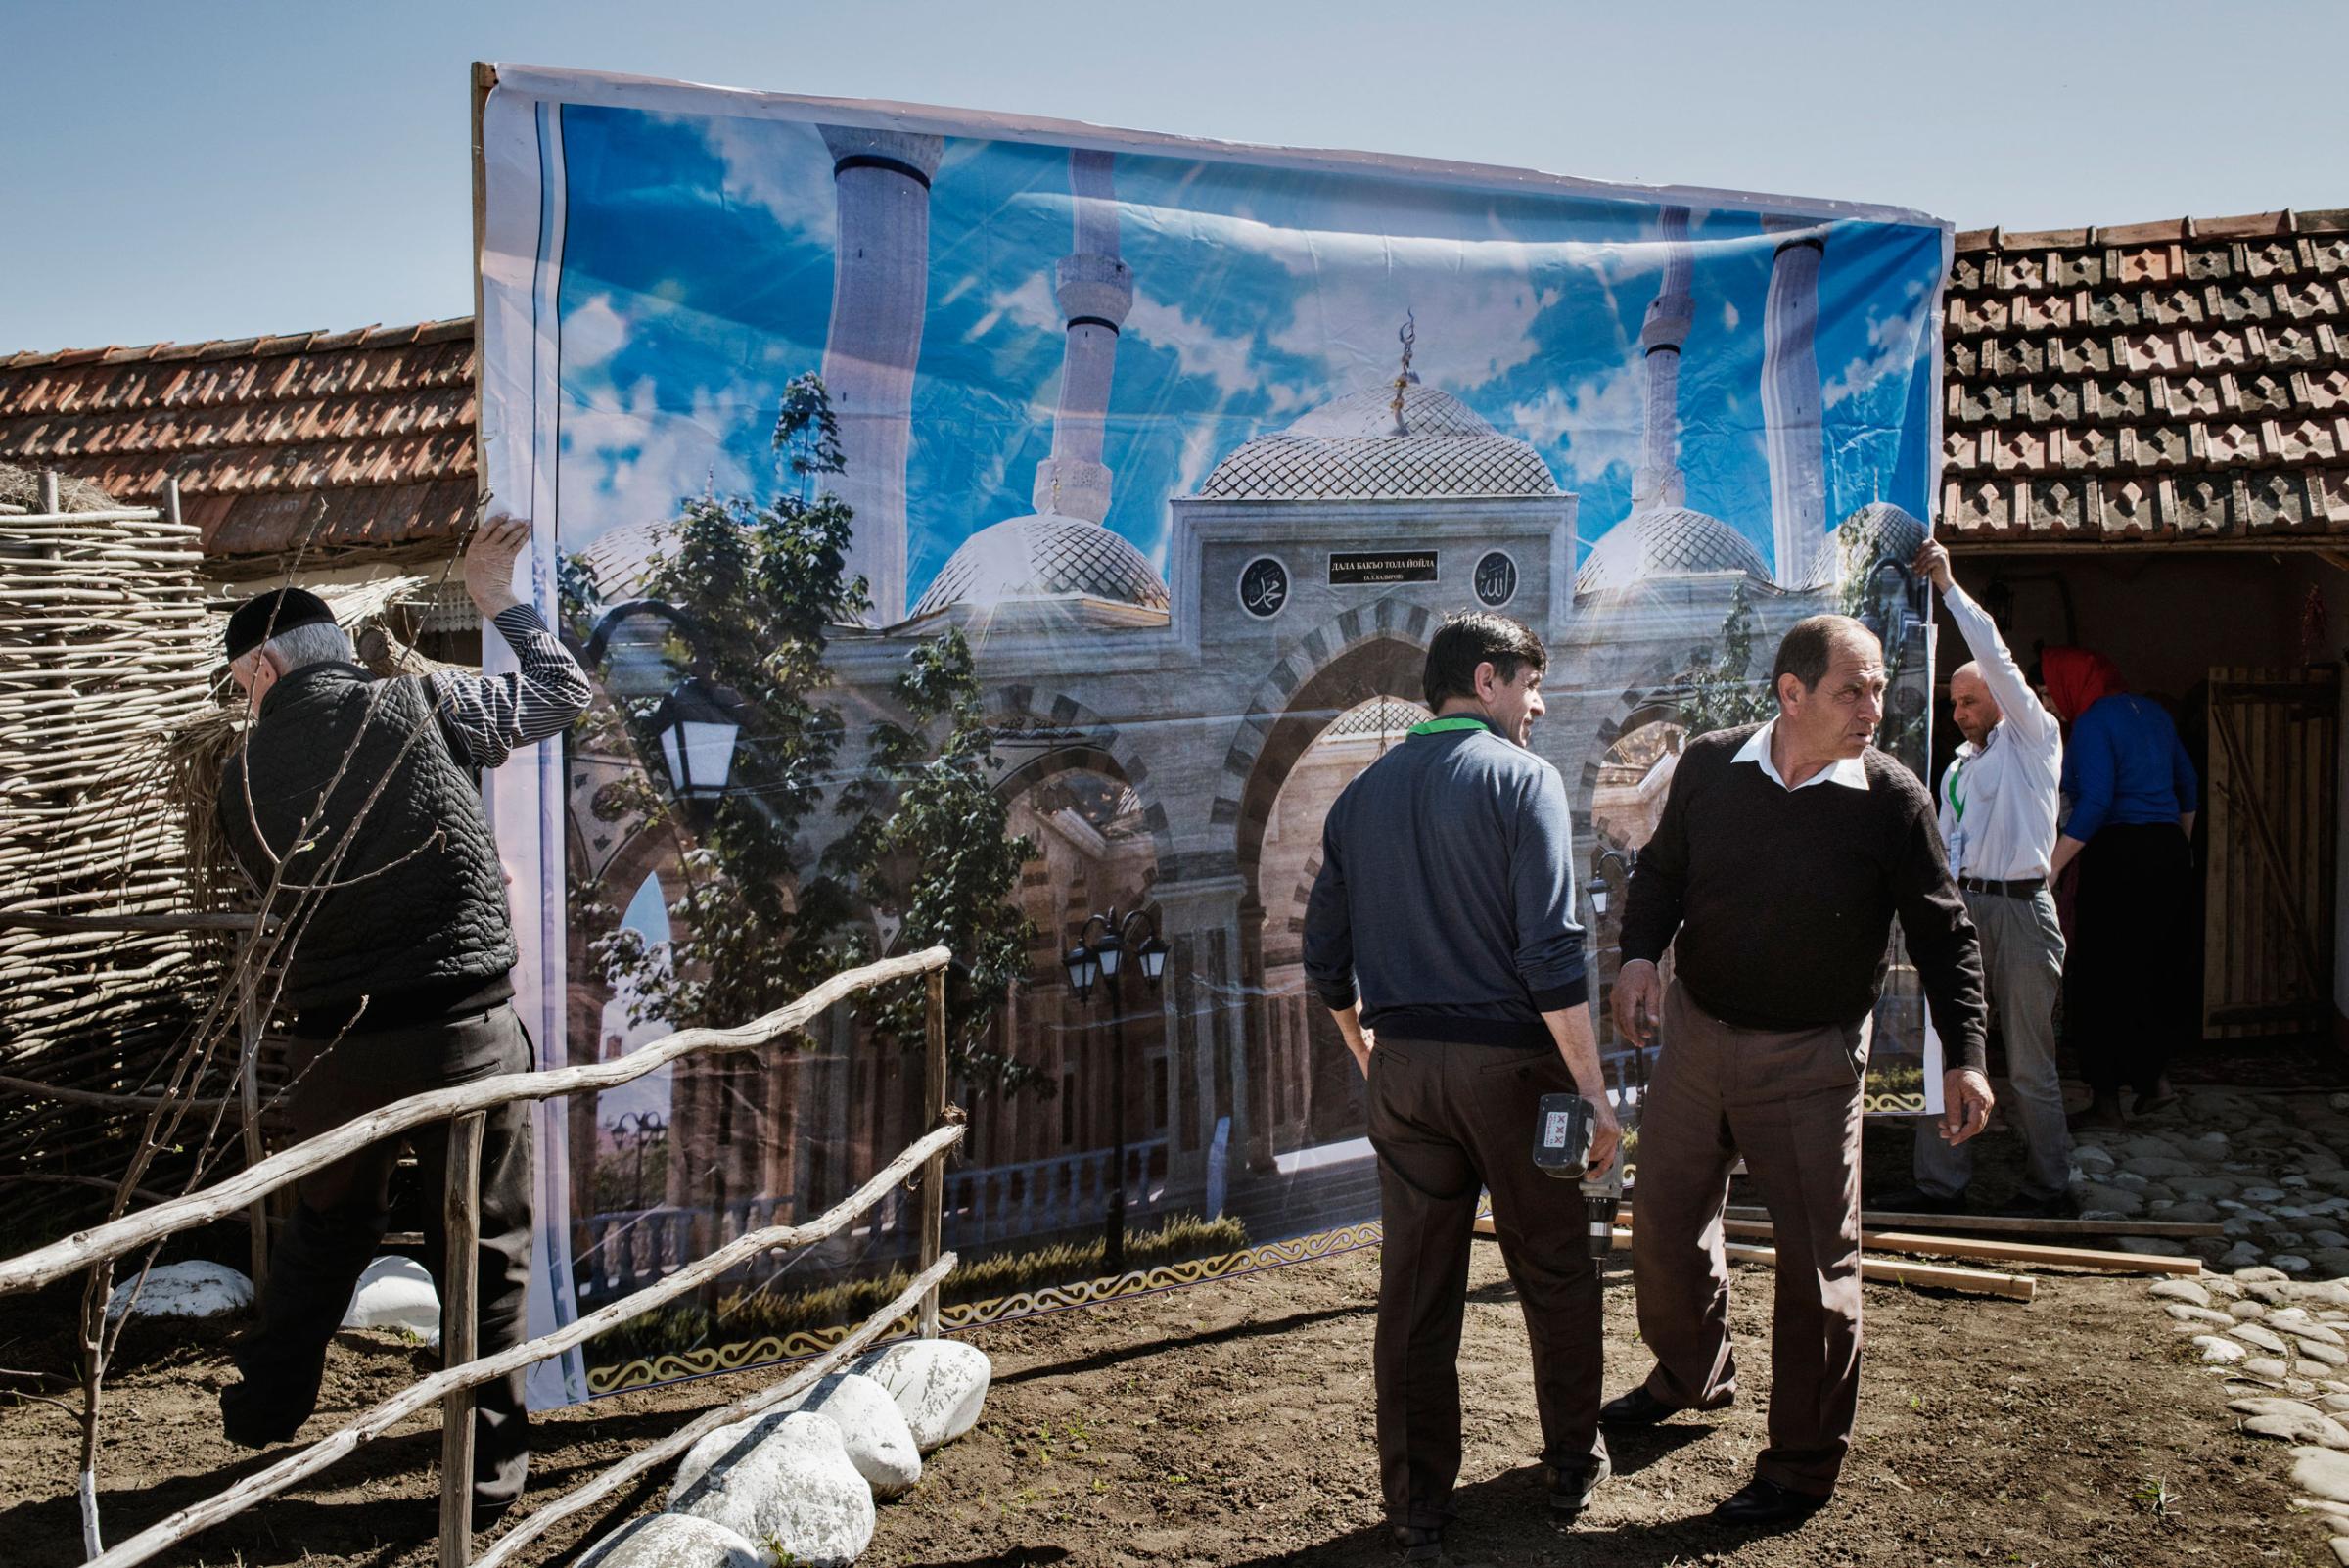 Workers set up their stand at a cultural festival near the town of Shali, Chechnya, April 18, 2015Yuri kozyrev—NOOR for TIME